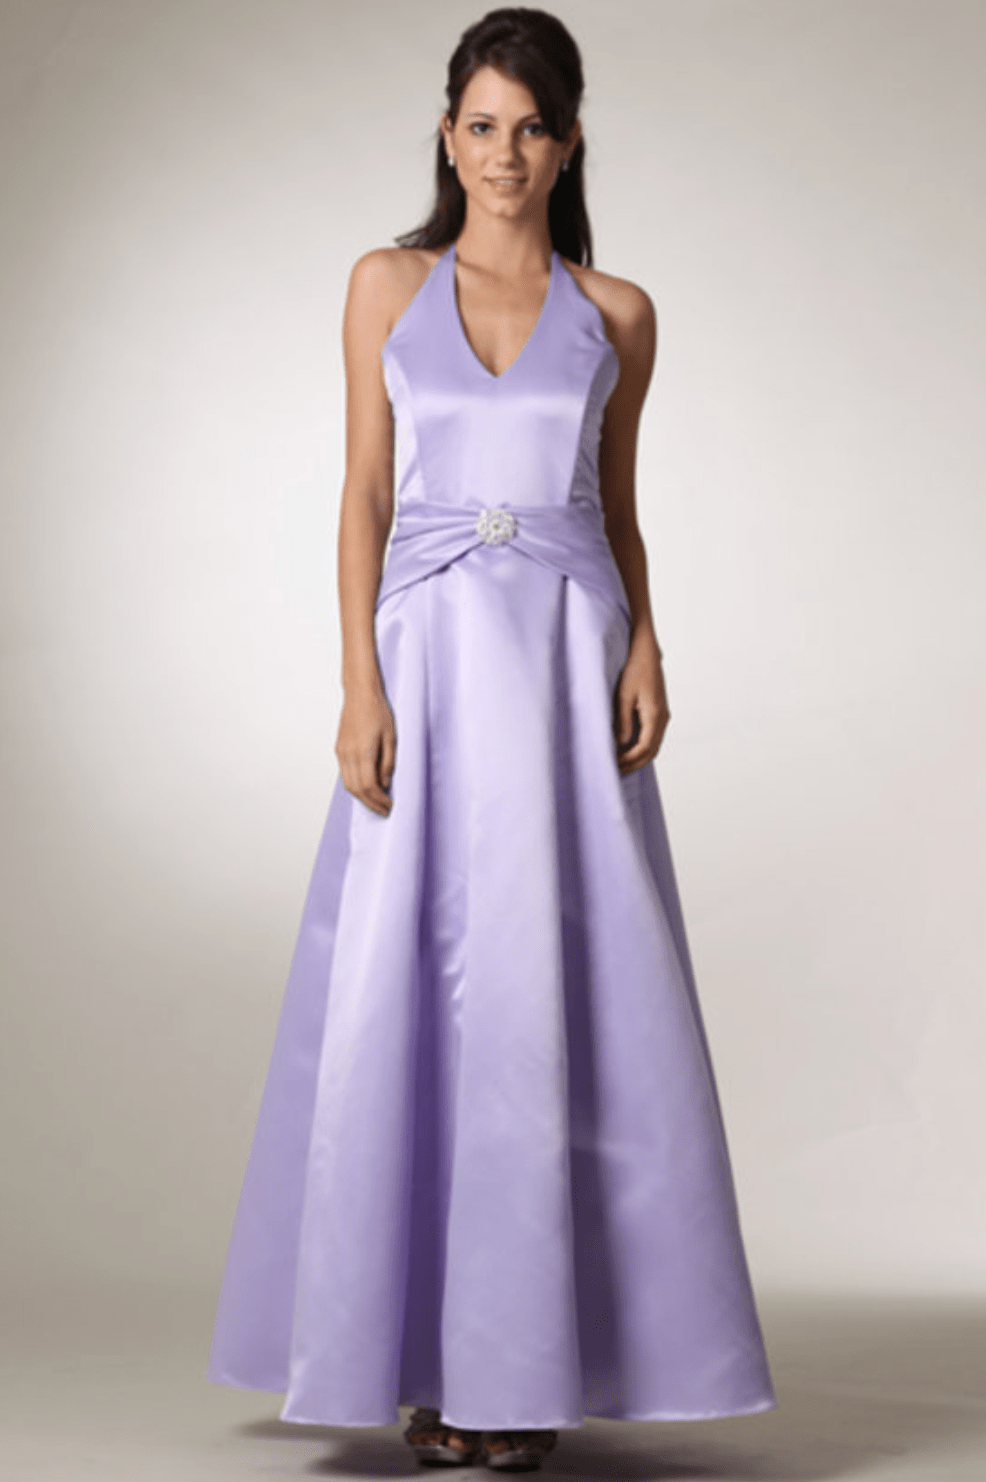 Satin Halter Jewel Dress by Fiesta | 10 Colors - NORMA REED